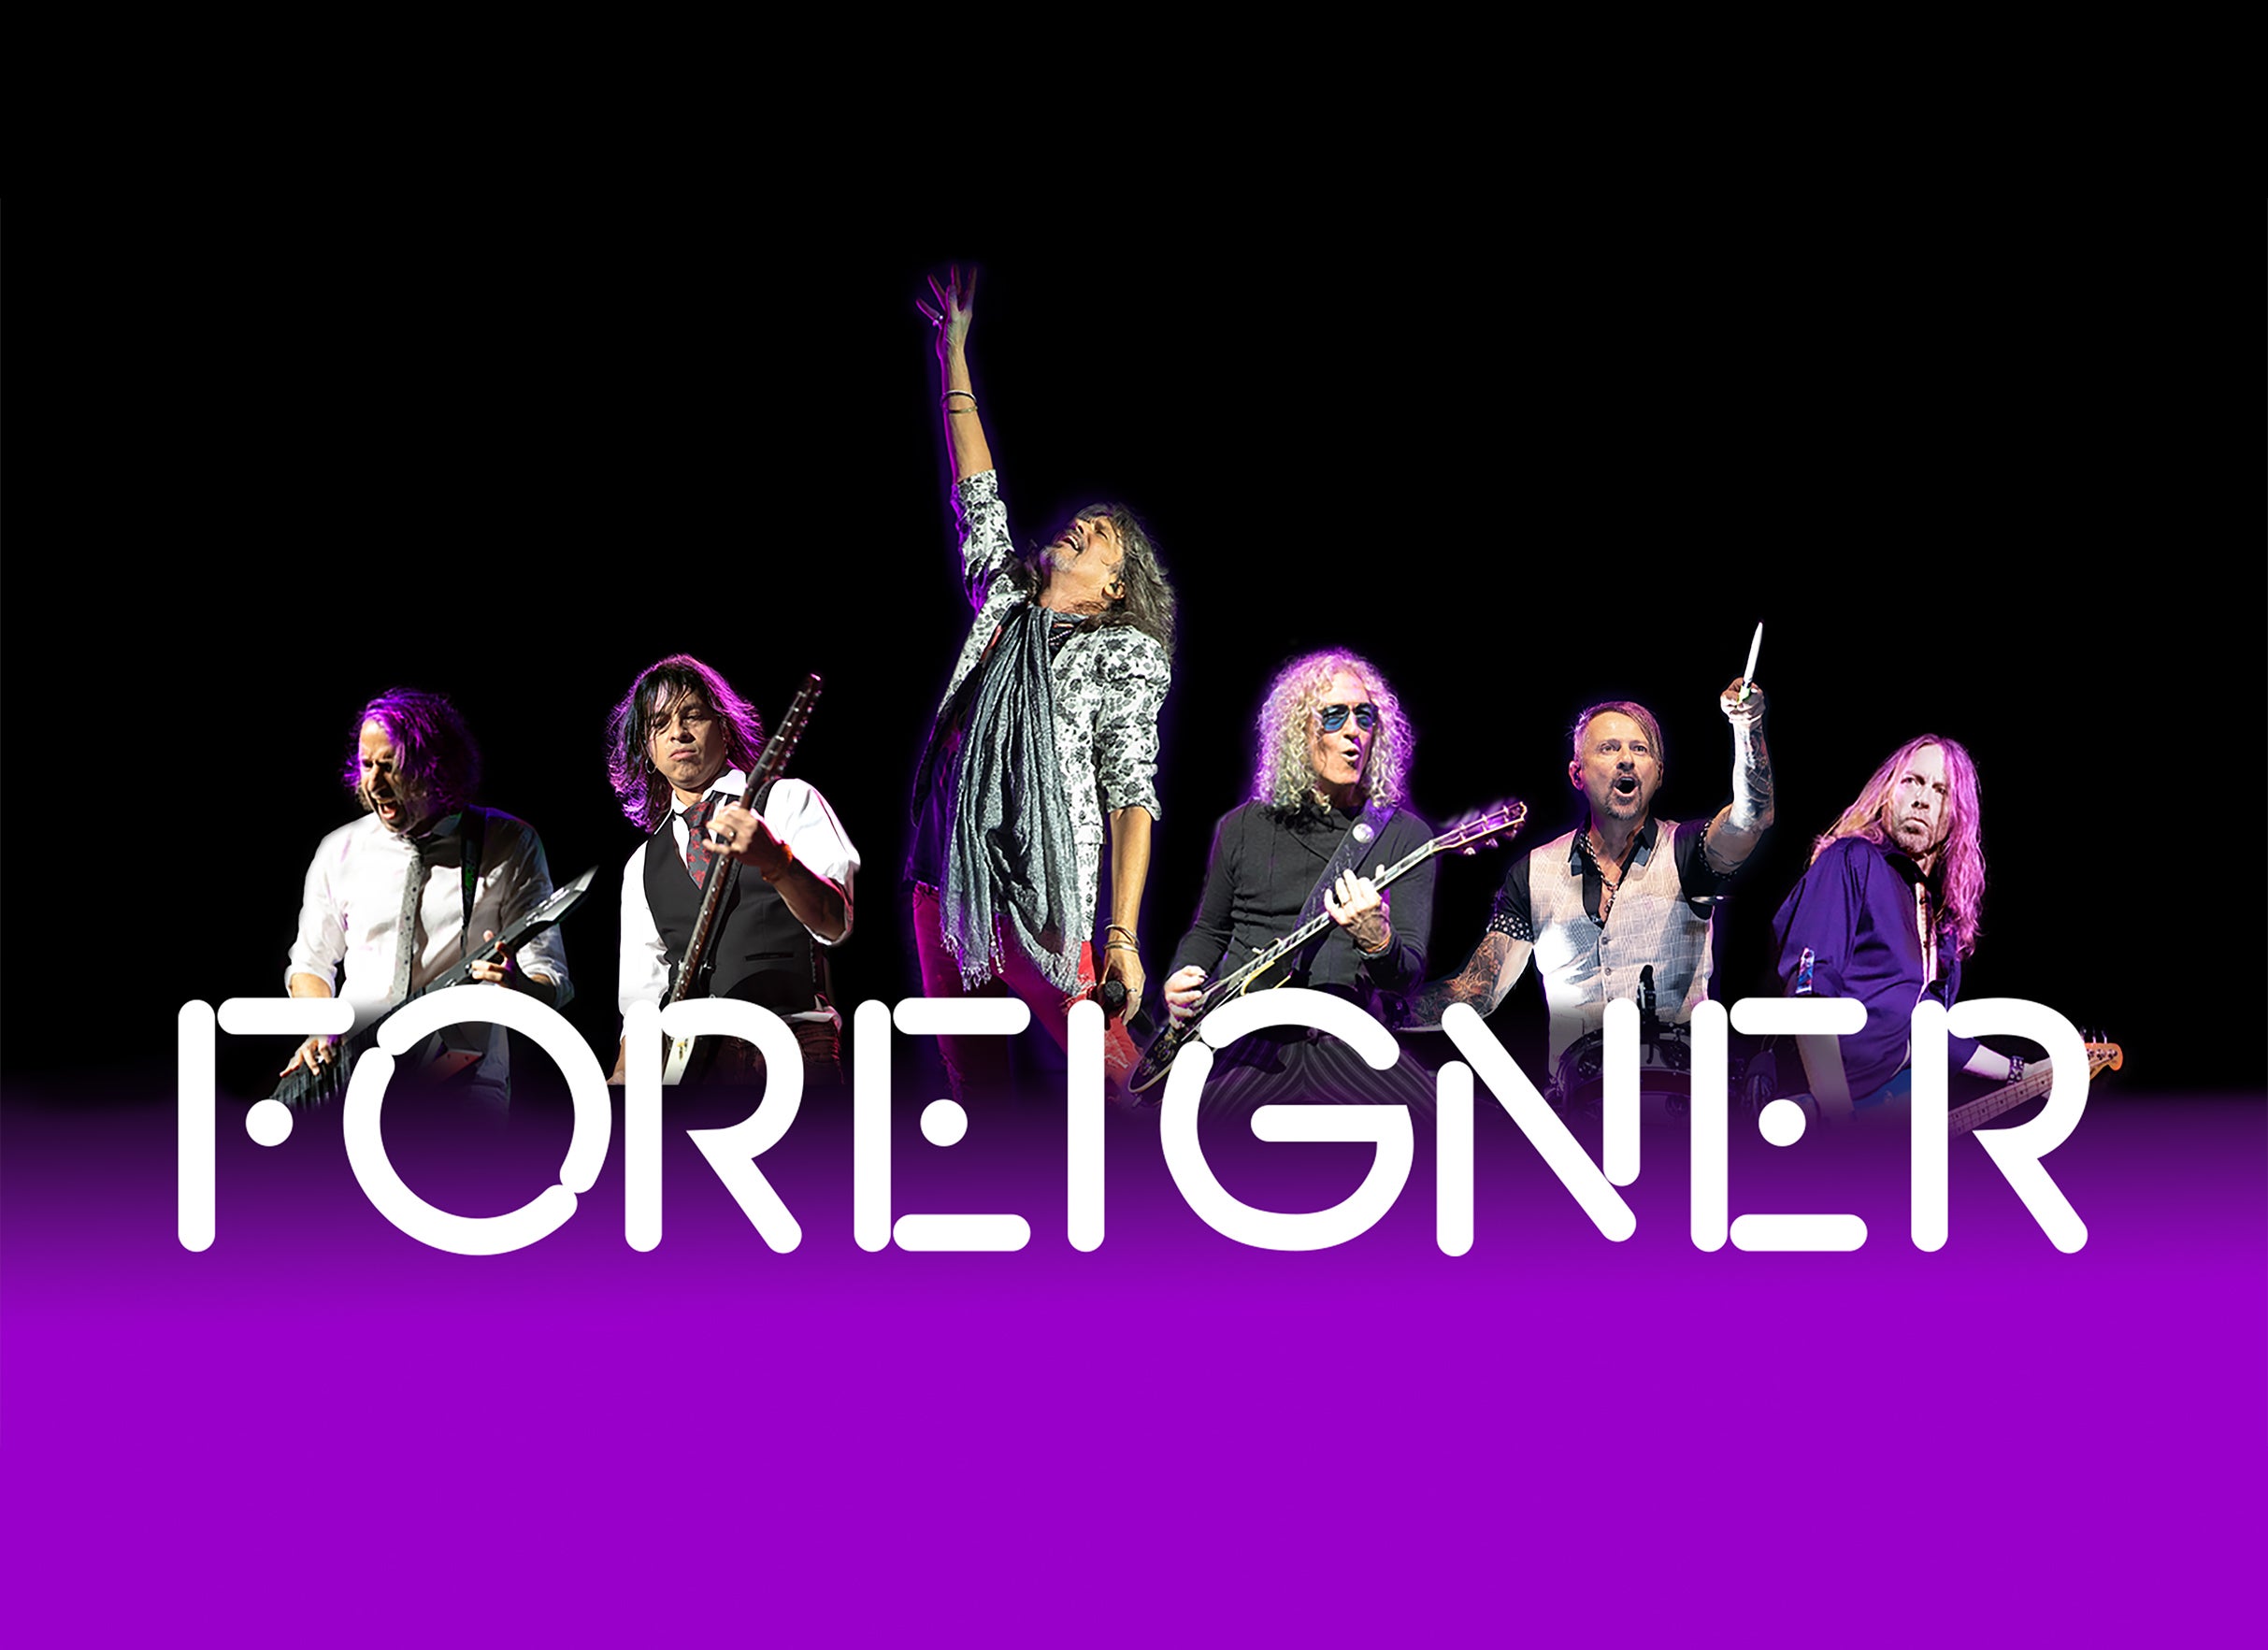 Foreigner: Feels Like the Last Time Farewell Tour in Las Vegas promo photo for VIP Package Onsale presale offer code